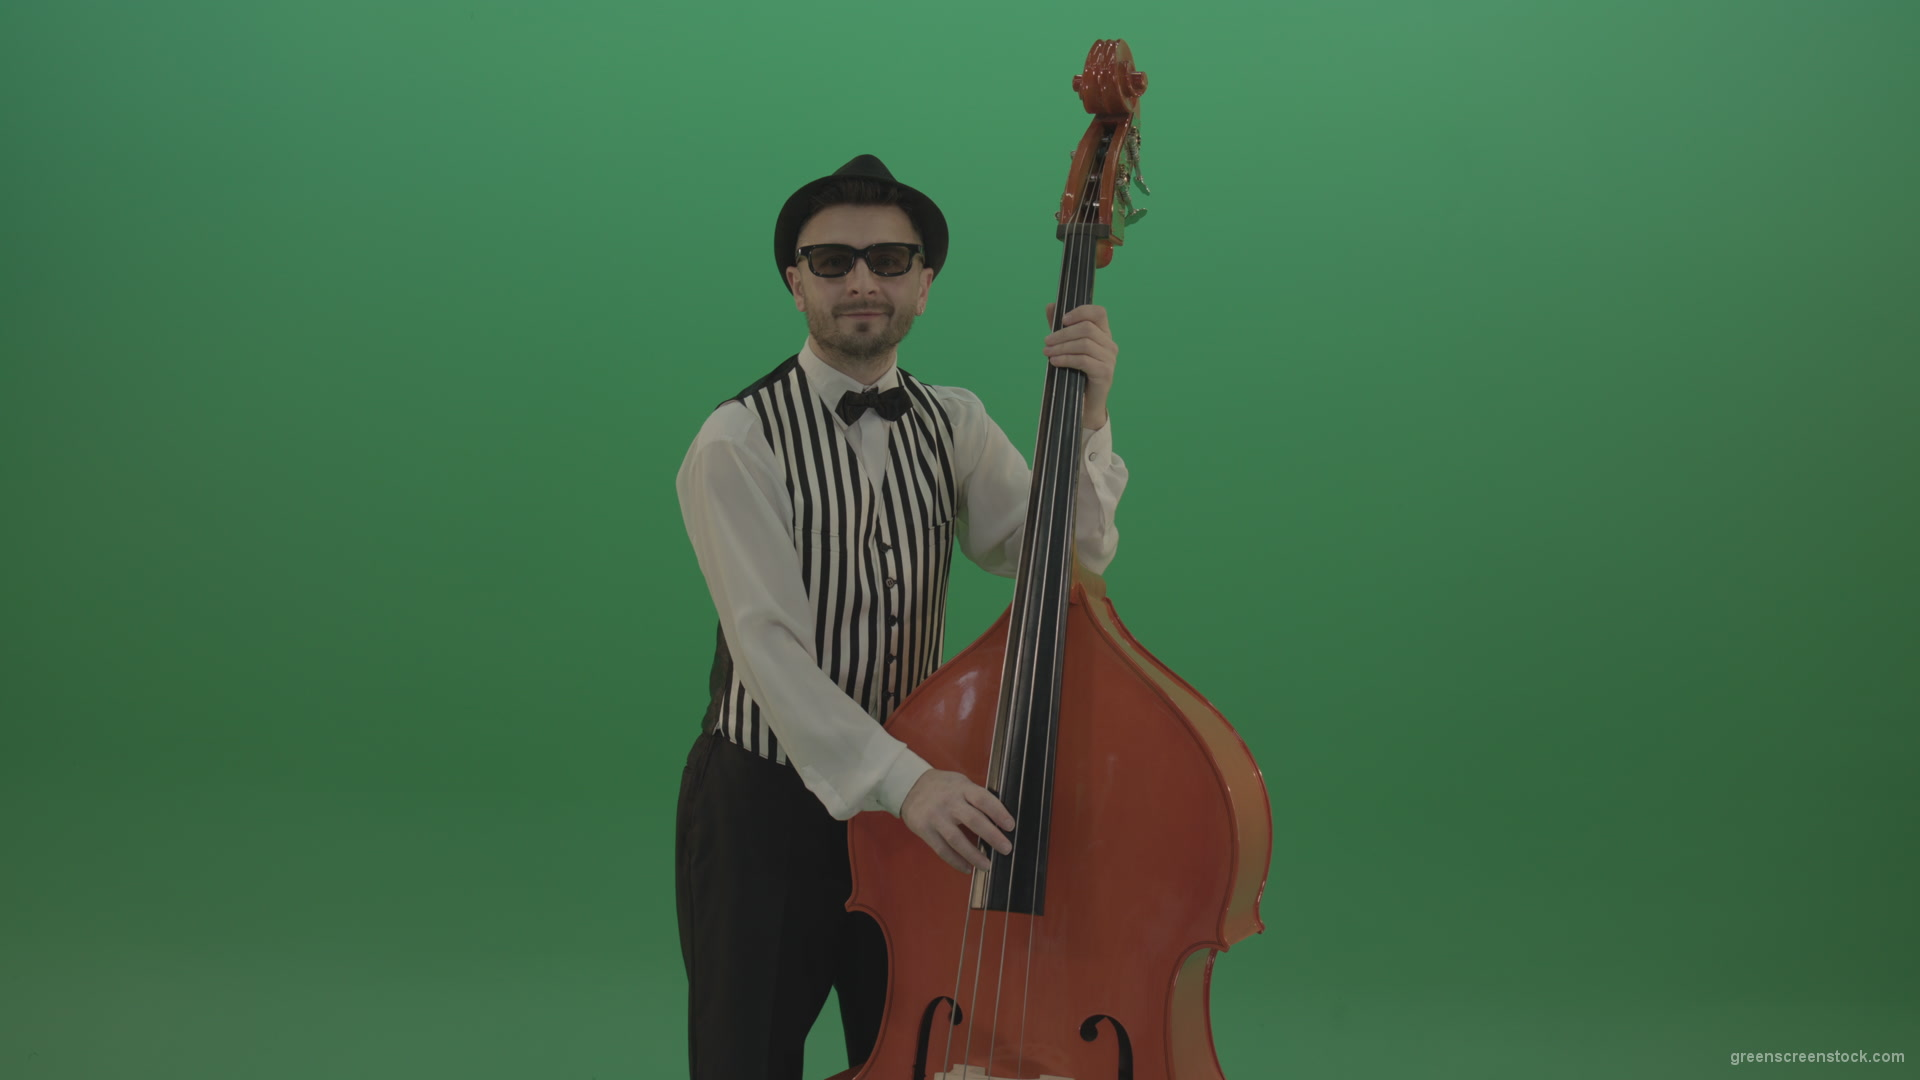 Virtuoso-man-playing-jazz-on-double-bass-String-music-instrument-isolated-on-green-screen_001 Green Screen Stock